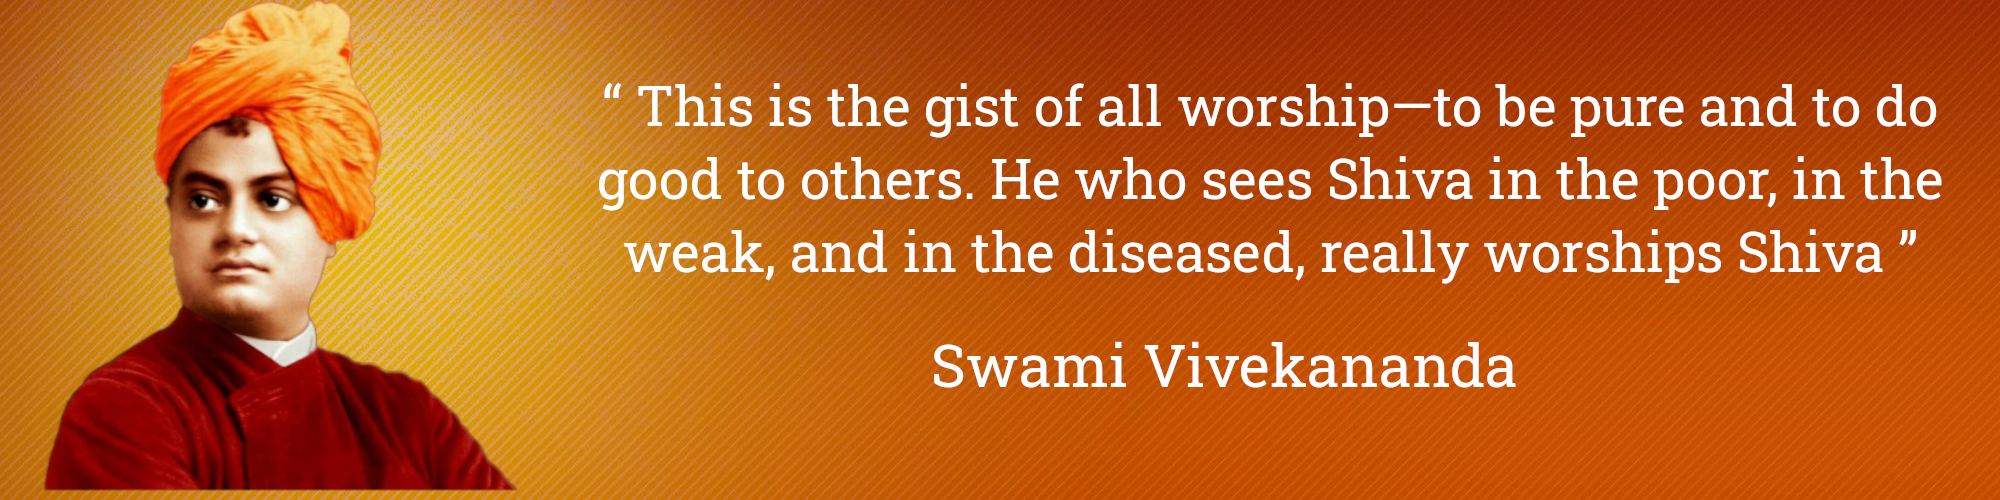 About Us – Swami Vivekananda Medical Mission